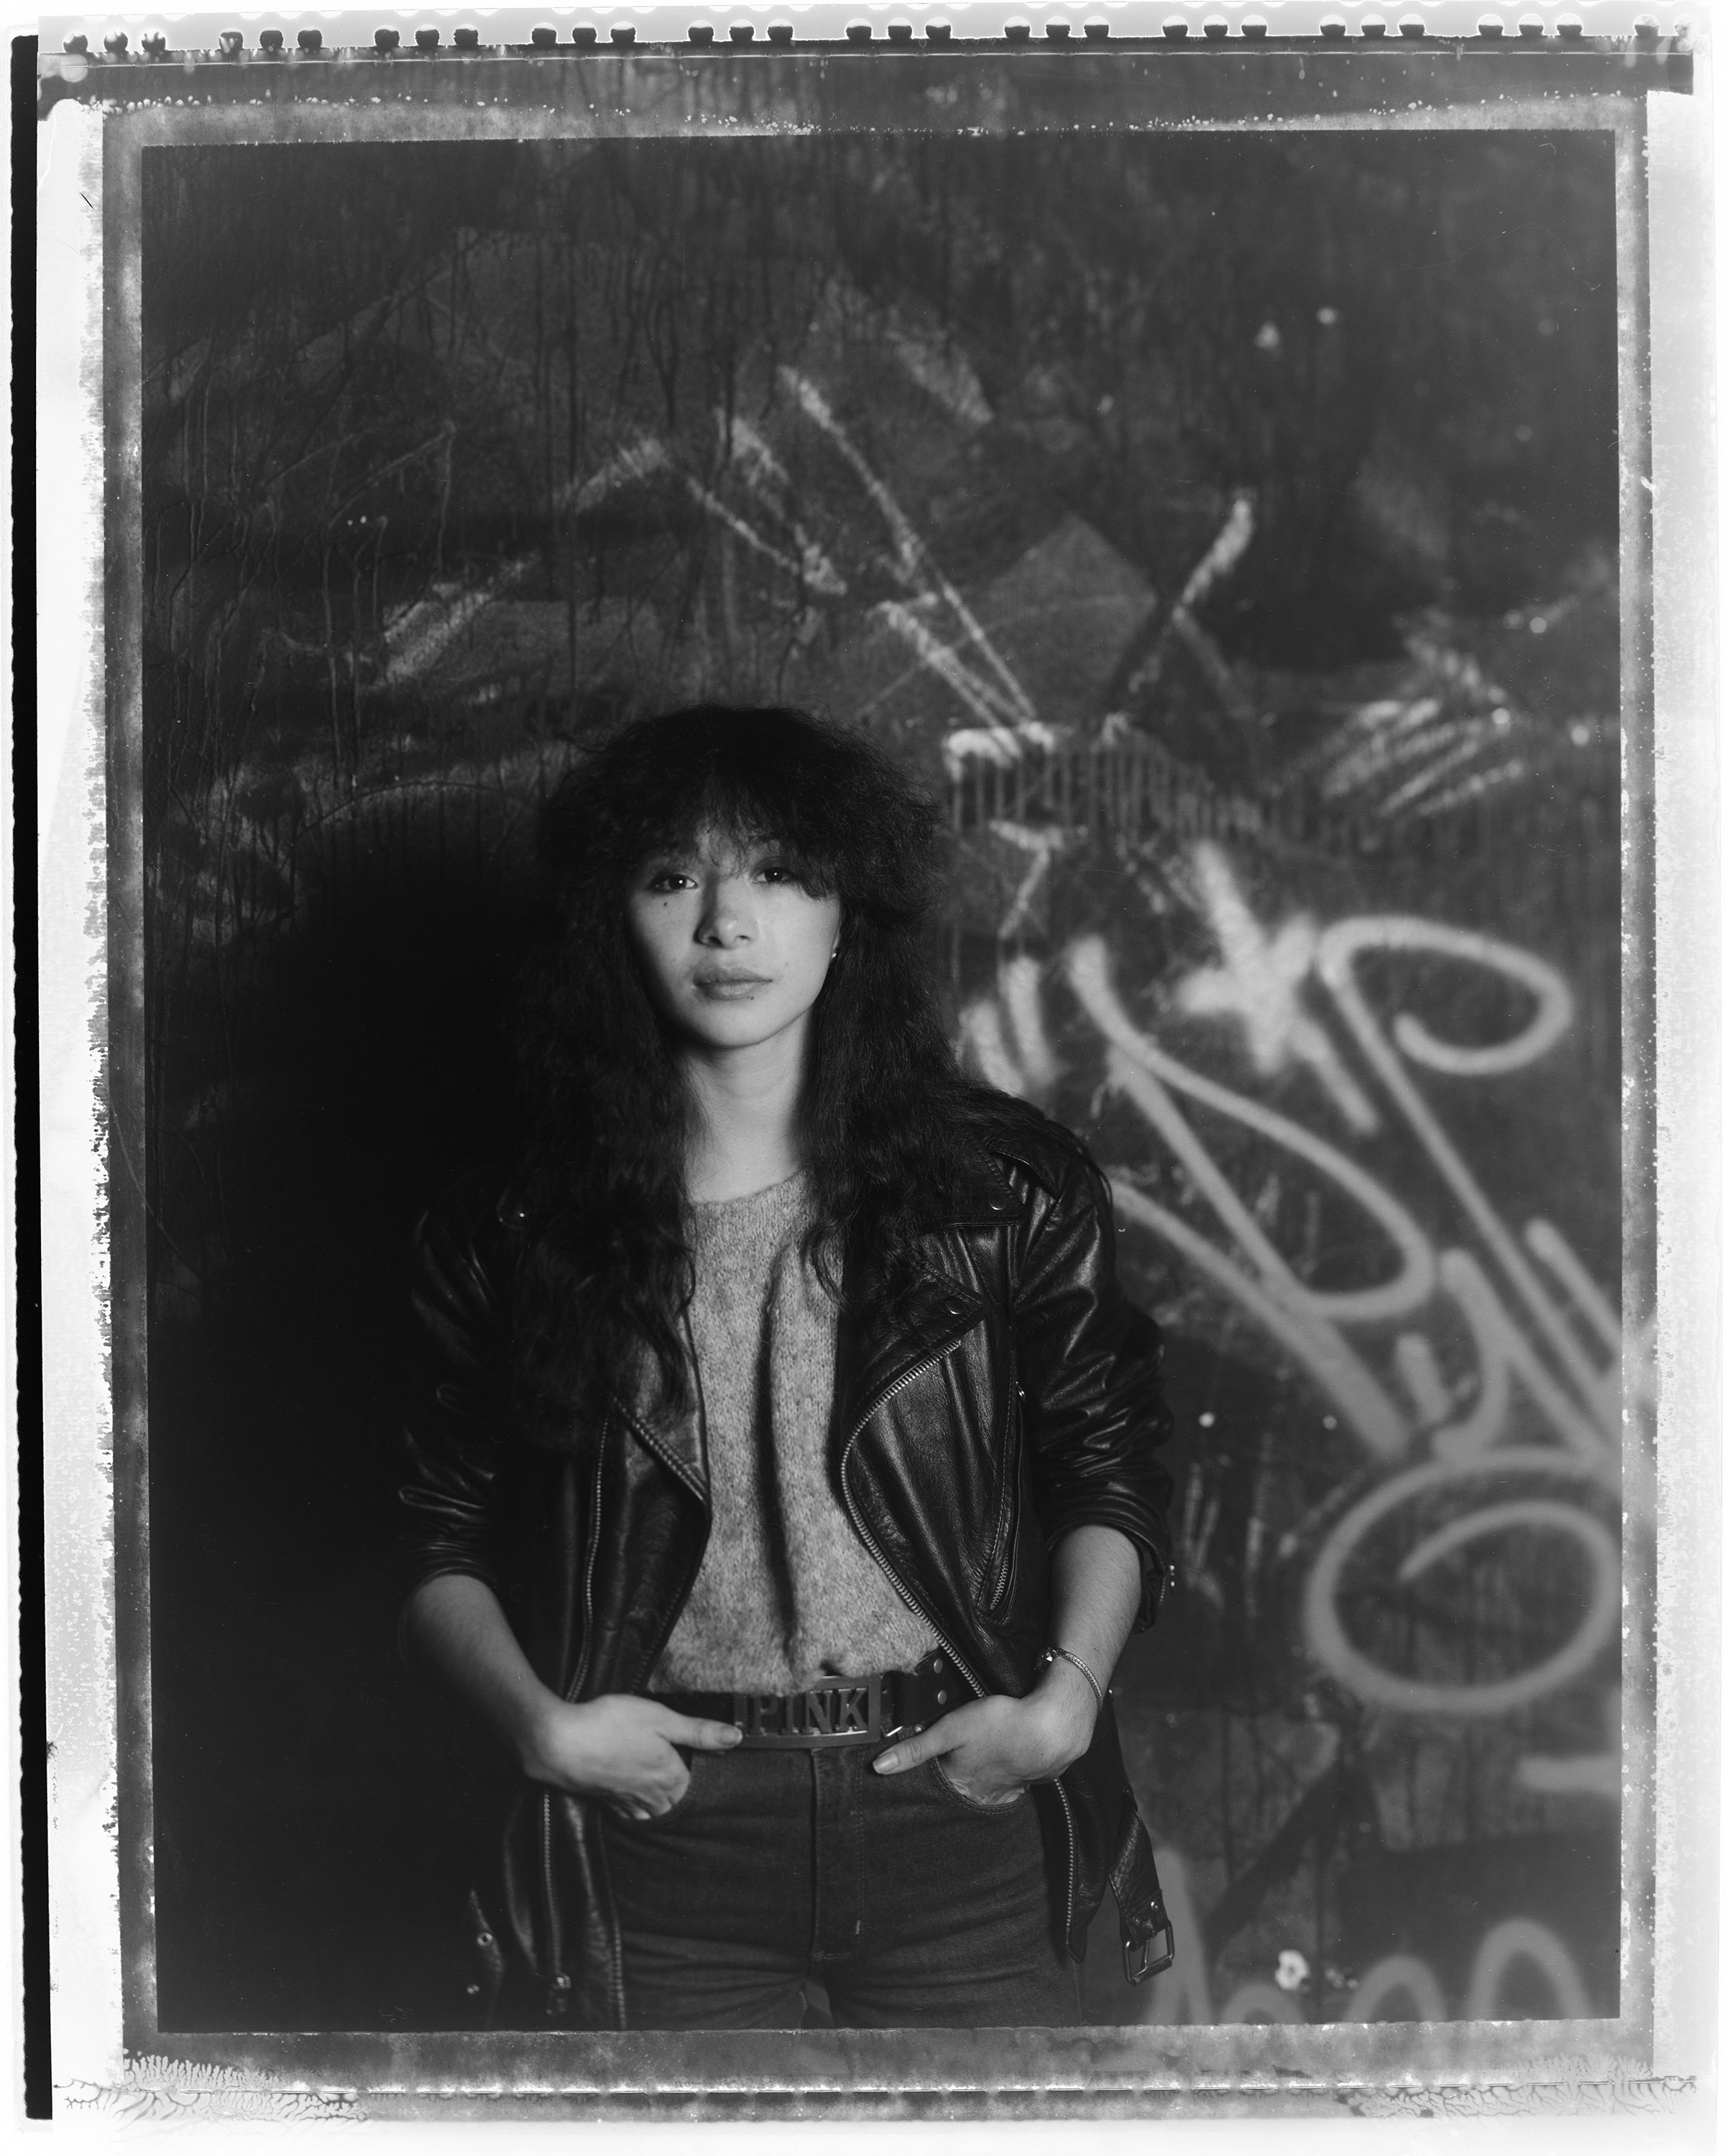 a black and white portrait of Lady Pink in front of graffiti by tom warren